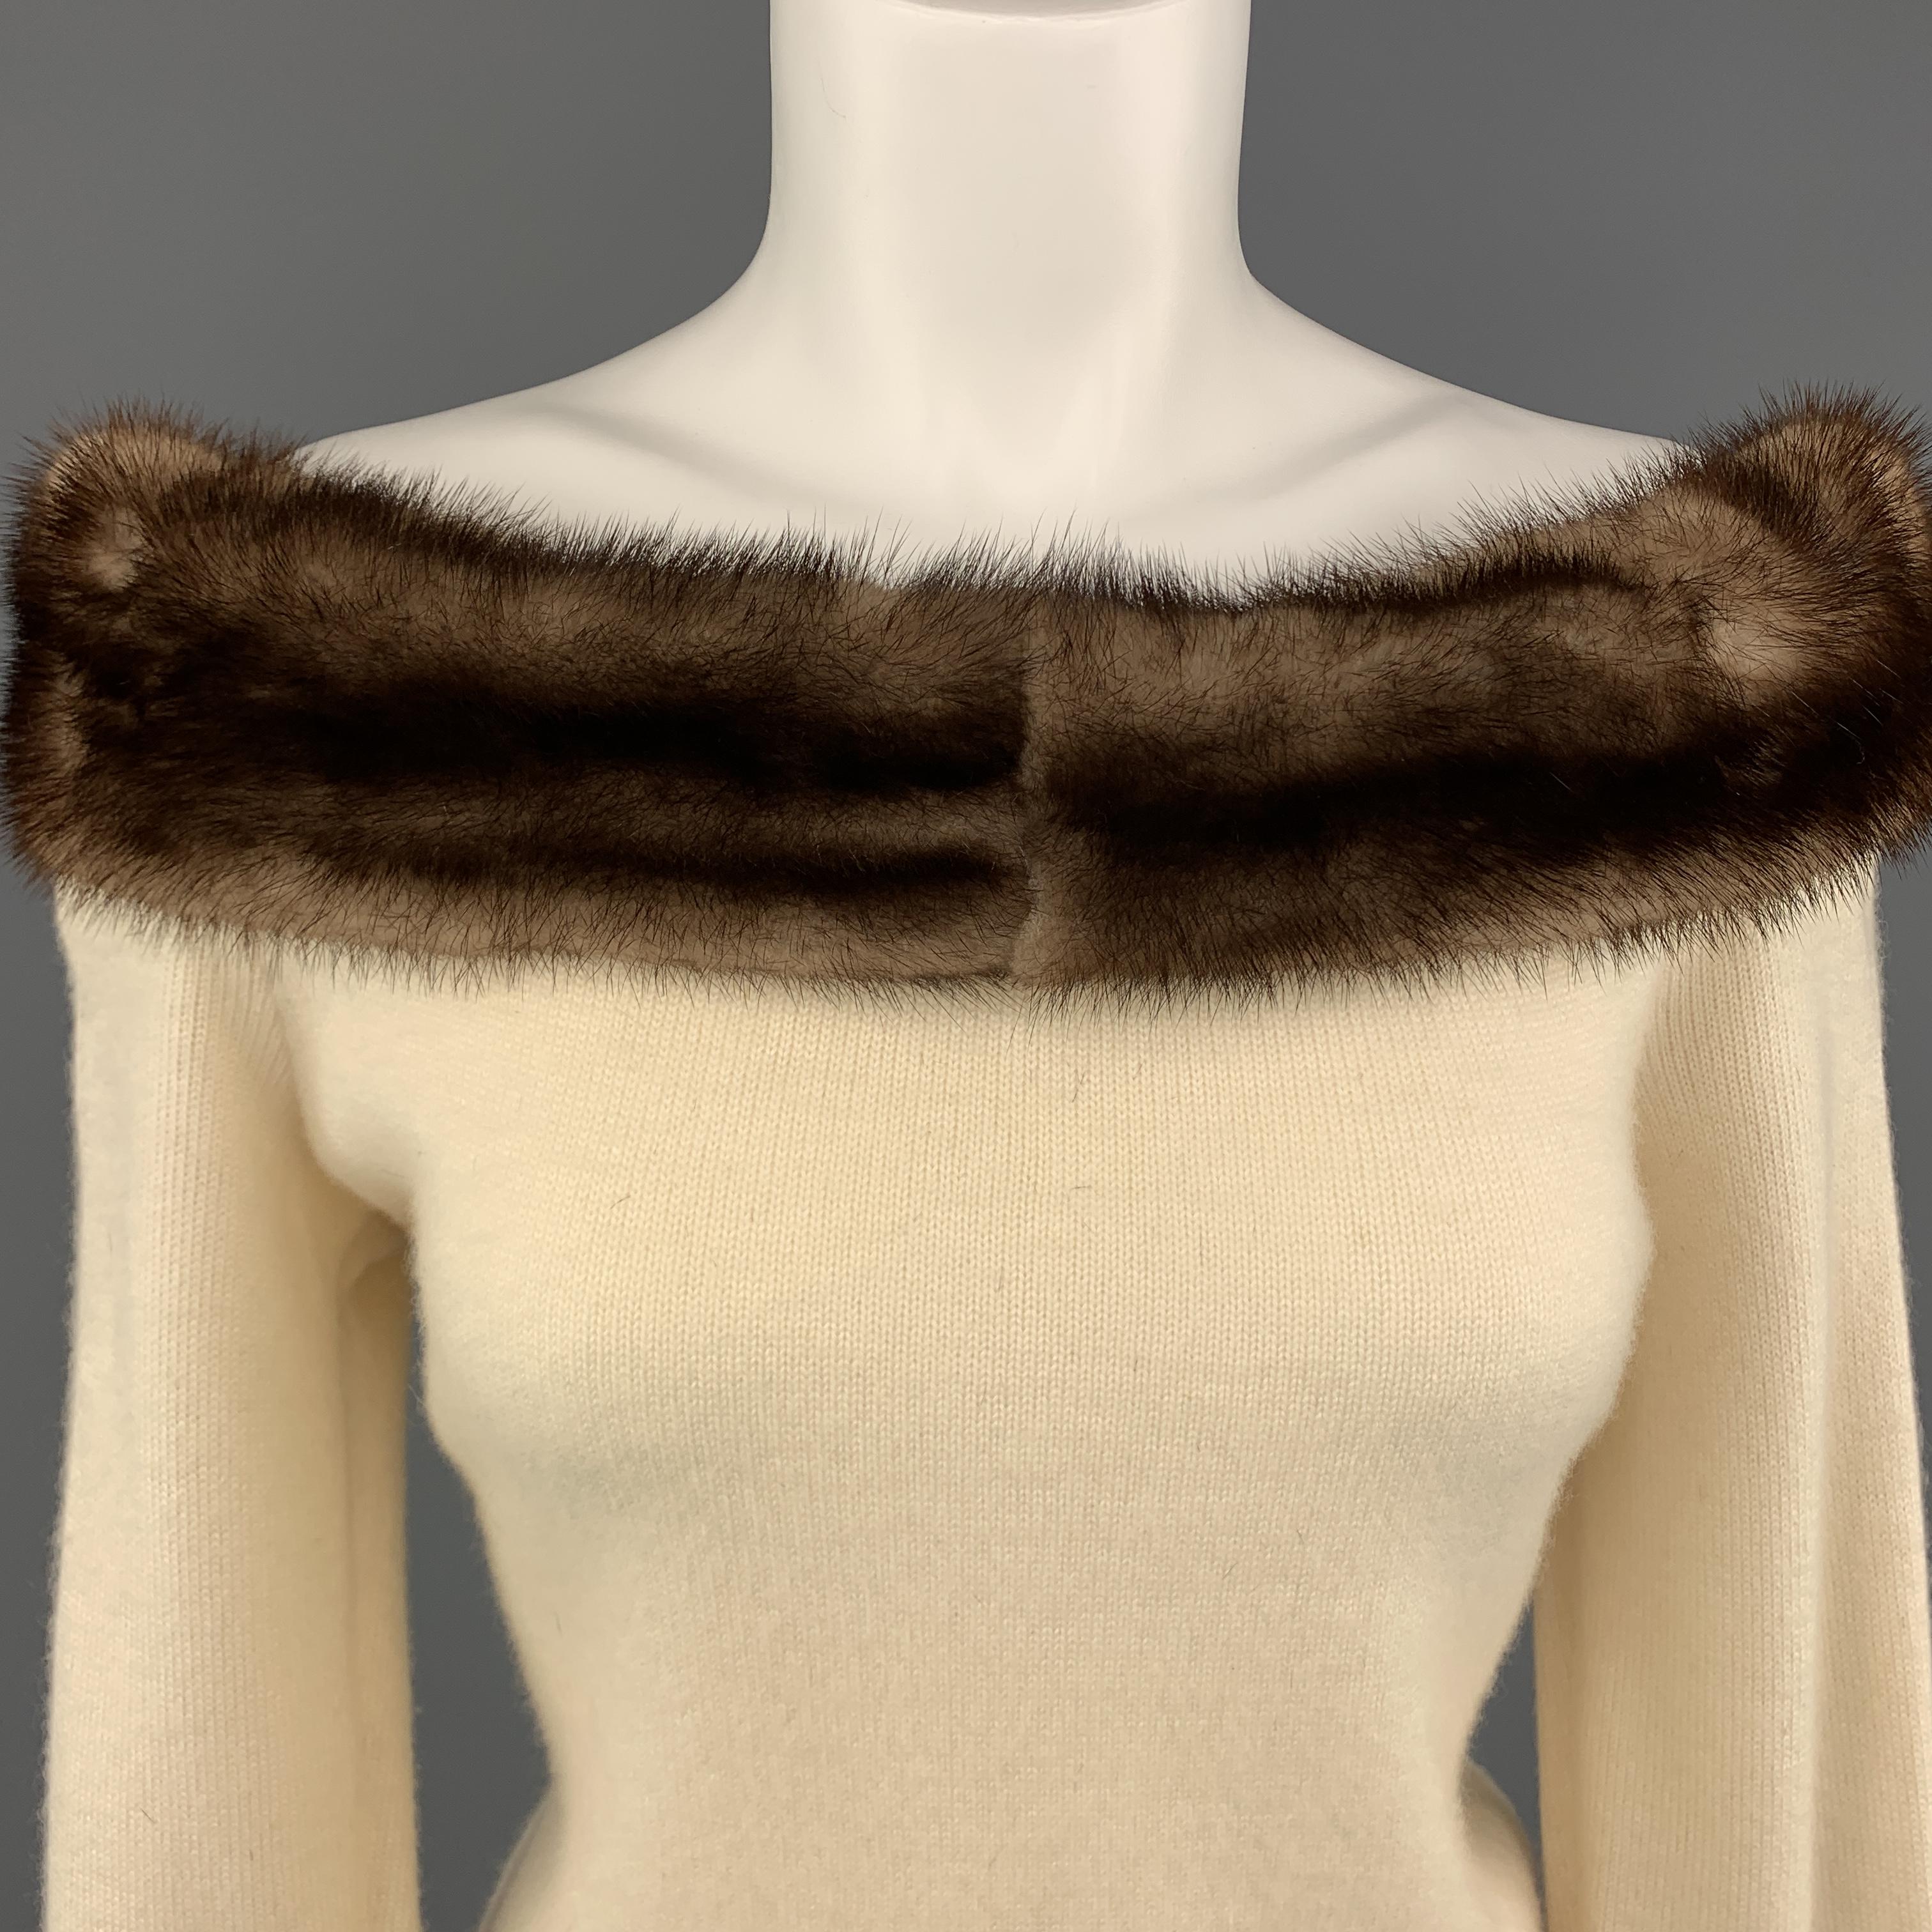 Vintage VALENTINO pullover sweater comes in cream cashmere knit with an off the shoulder, mink fur trimmed neckline. Made in Italy.
 
Very Good Pre-Owned Condition.
Marked: M
 
Measurements:
 
Shoulder: 19 in.
Bust: 40 in.
Sleeve: 25 in.
Length: 20